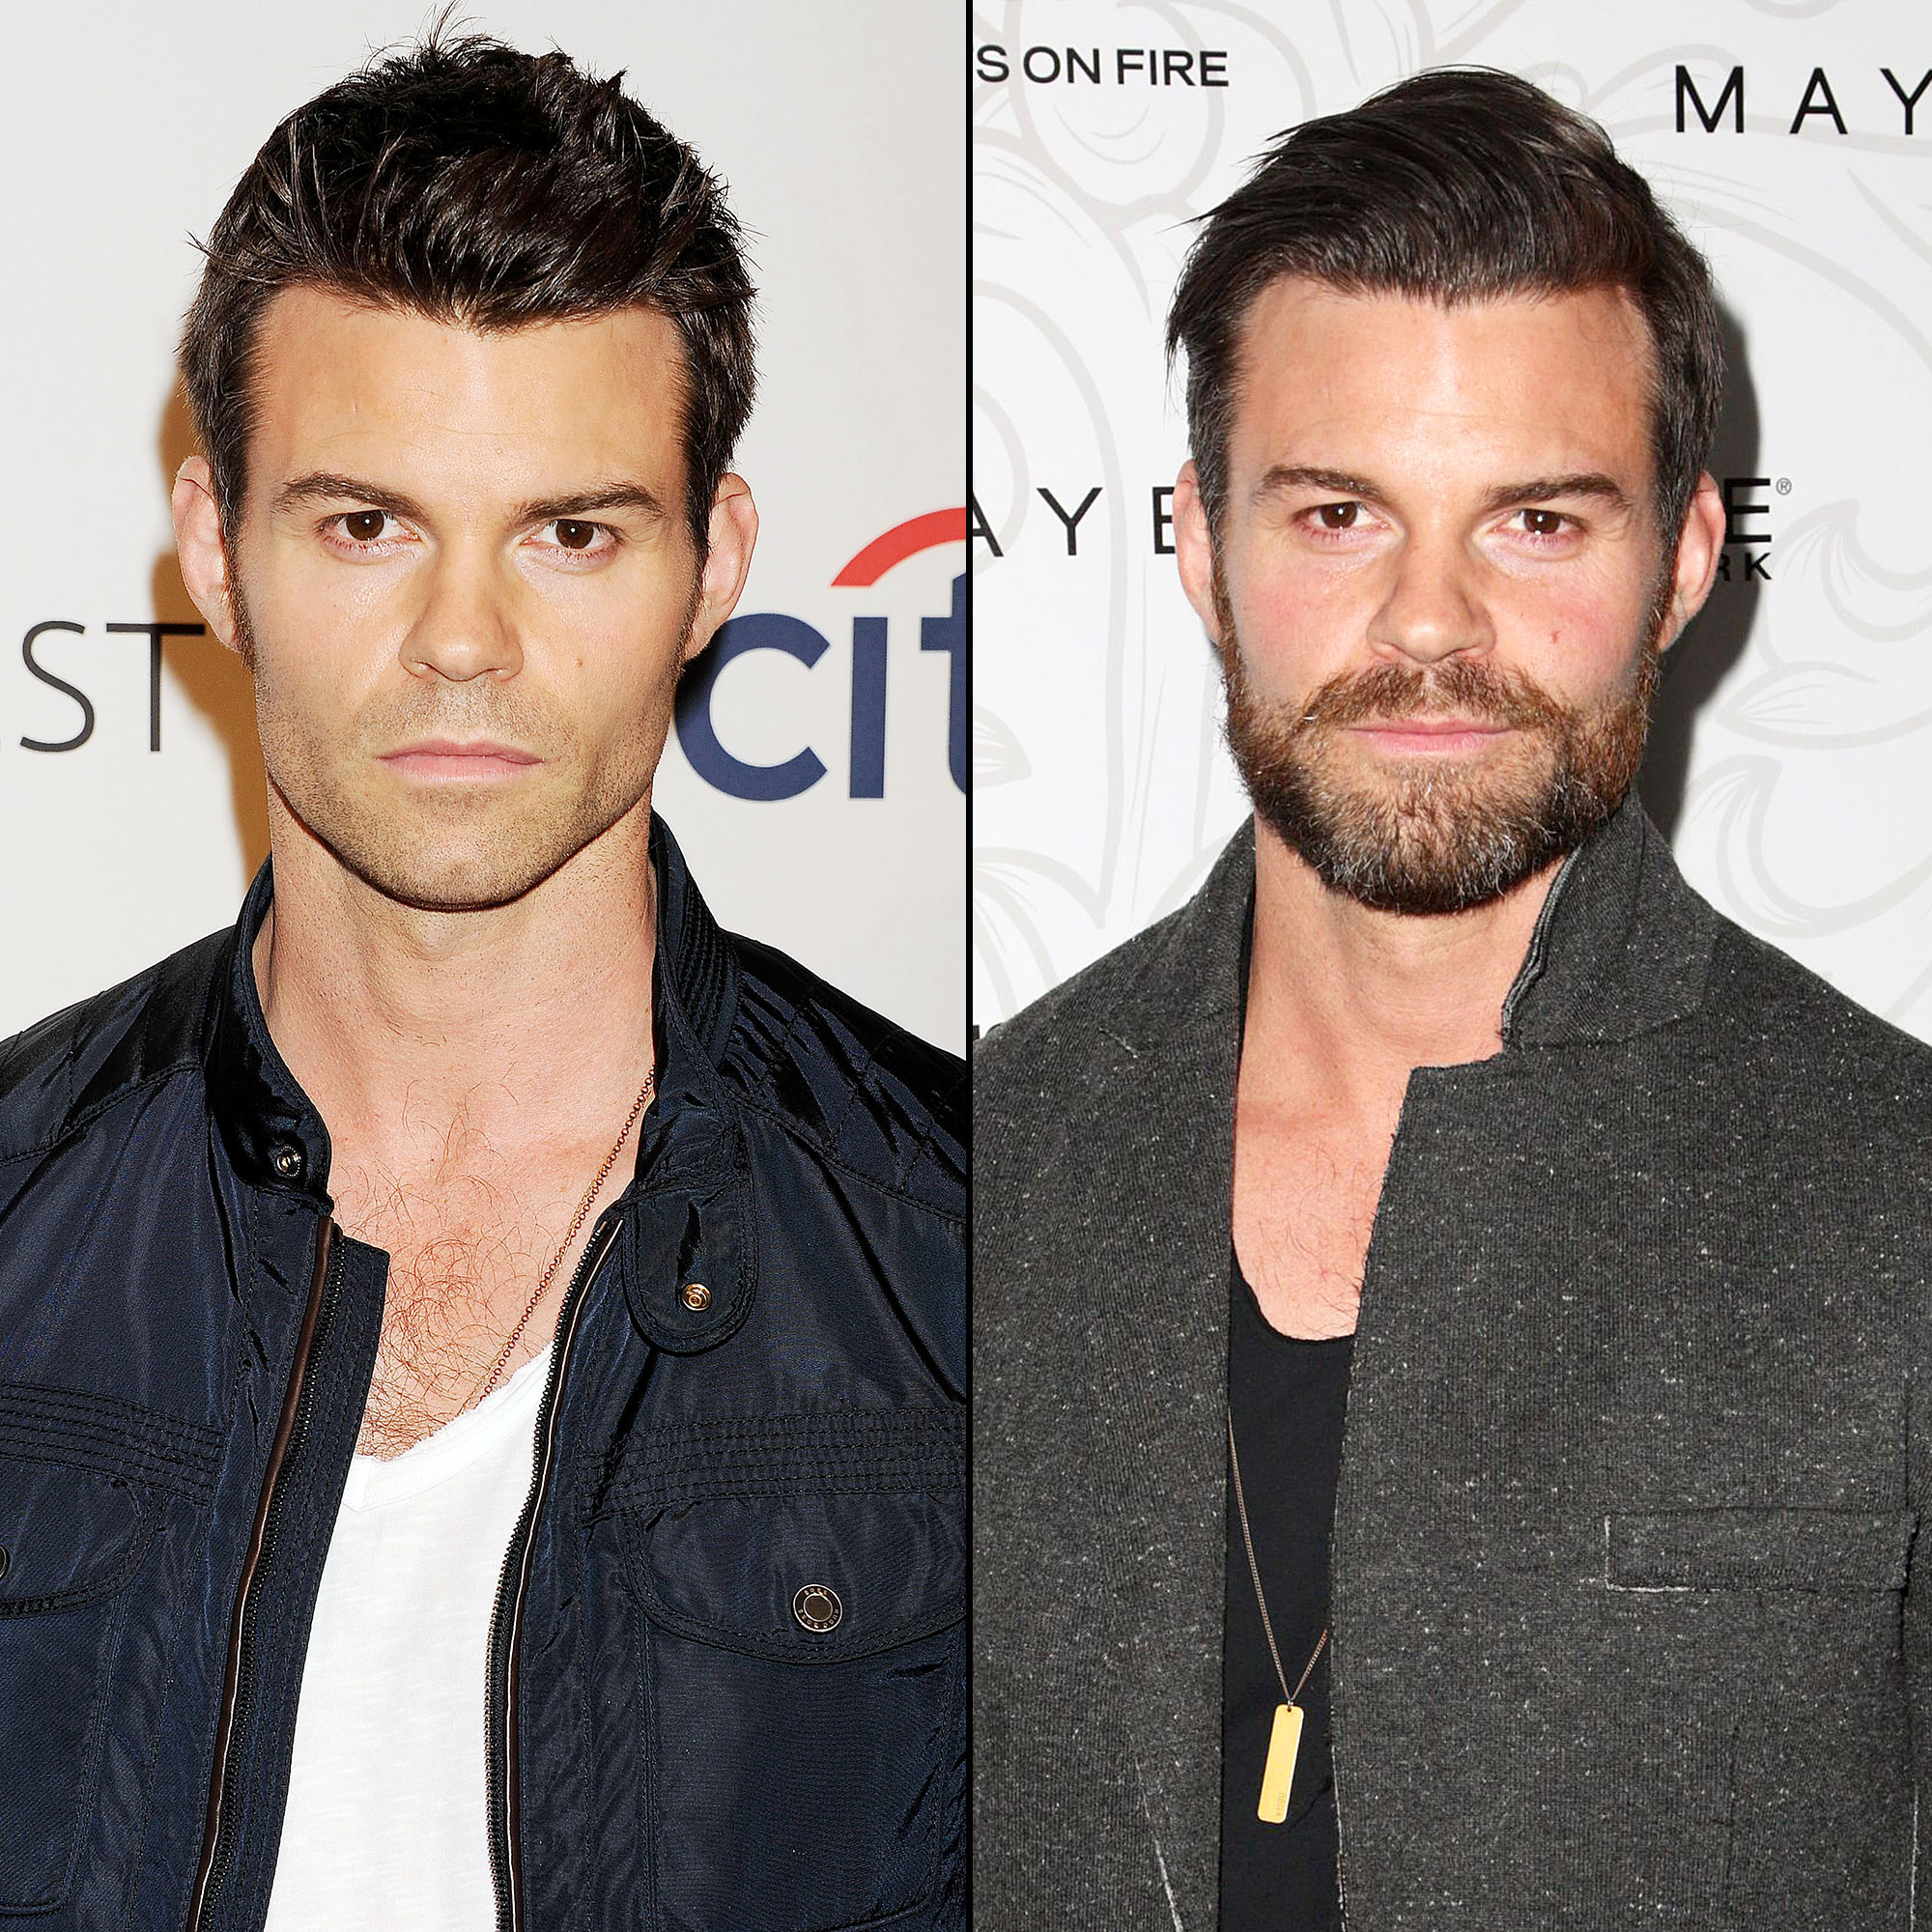 The Originals' Cast: Where Are They Now?